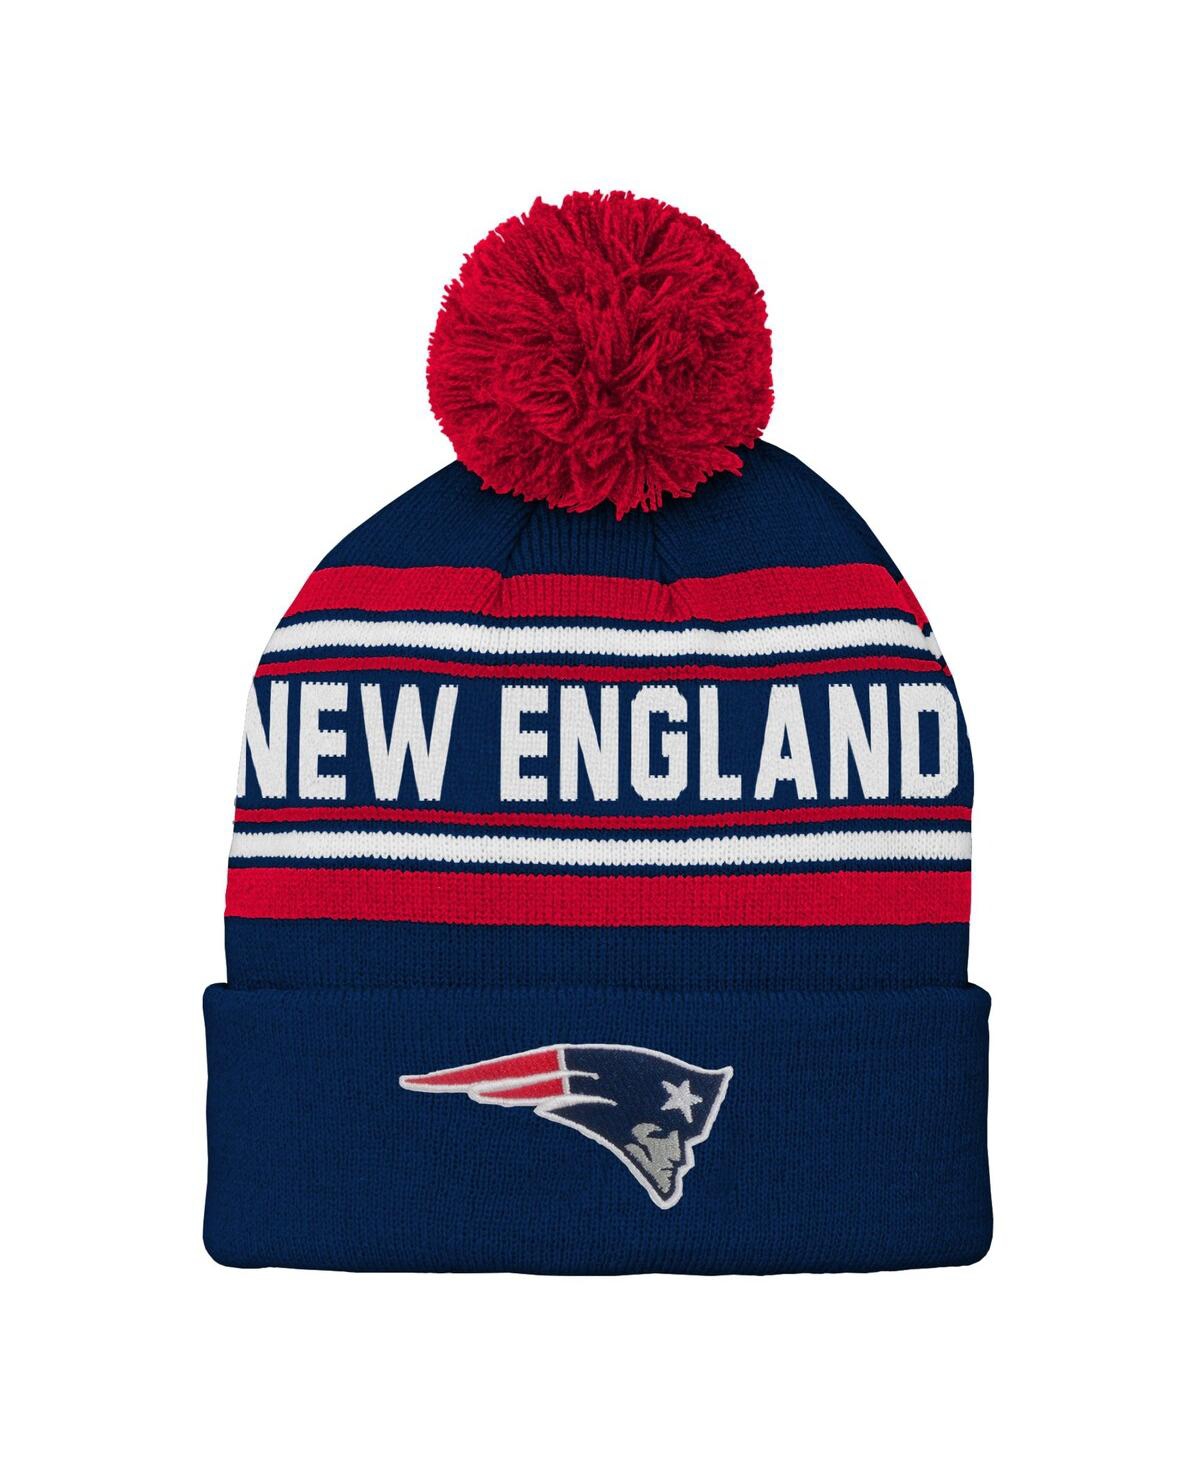 Outerstuff Babies' Little Boys And Girls Navy New England Patriots Jacquard Cuffed Knit Hat With Pom